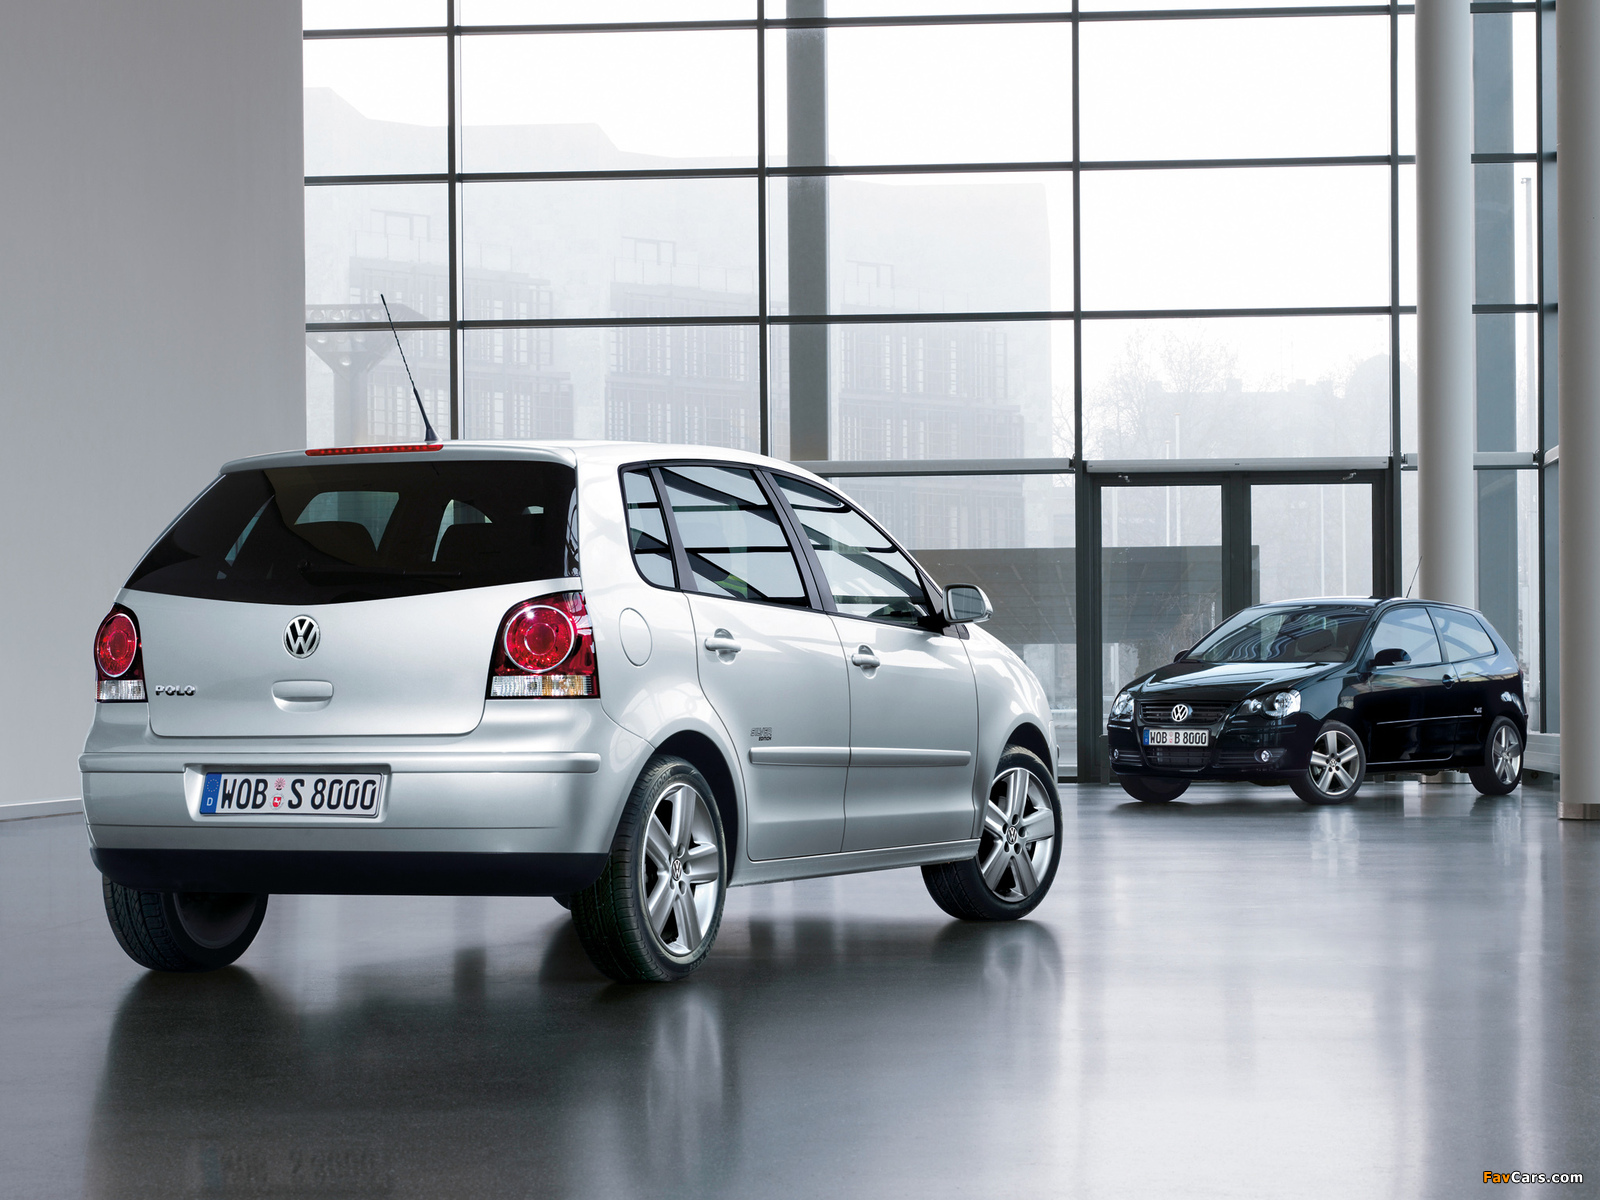 Images of Volkswagen Polo (1600 x 1200)